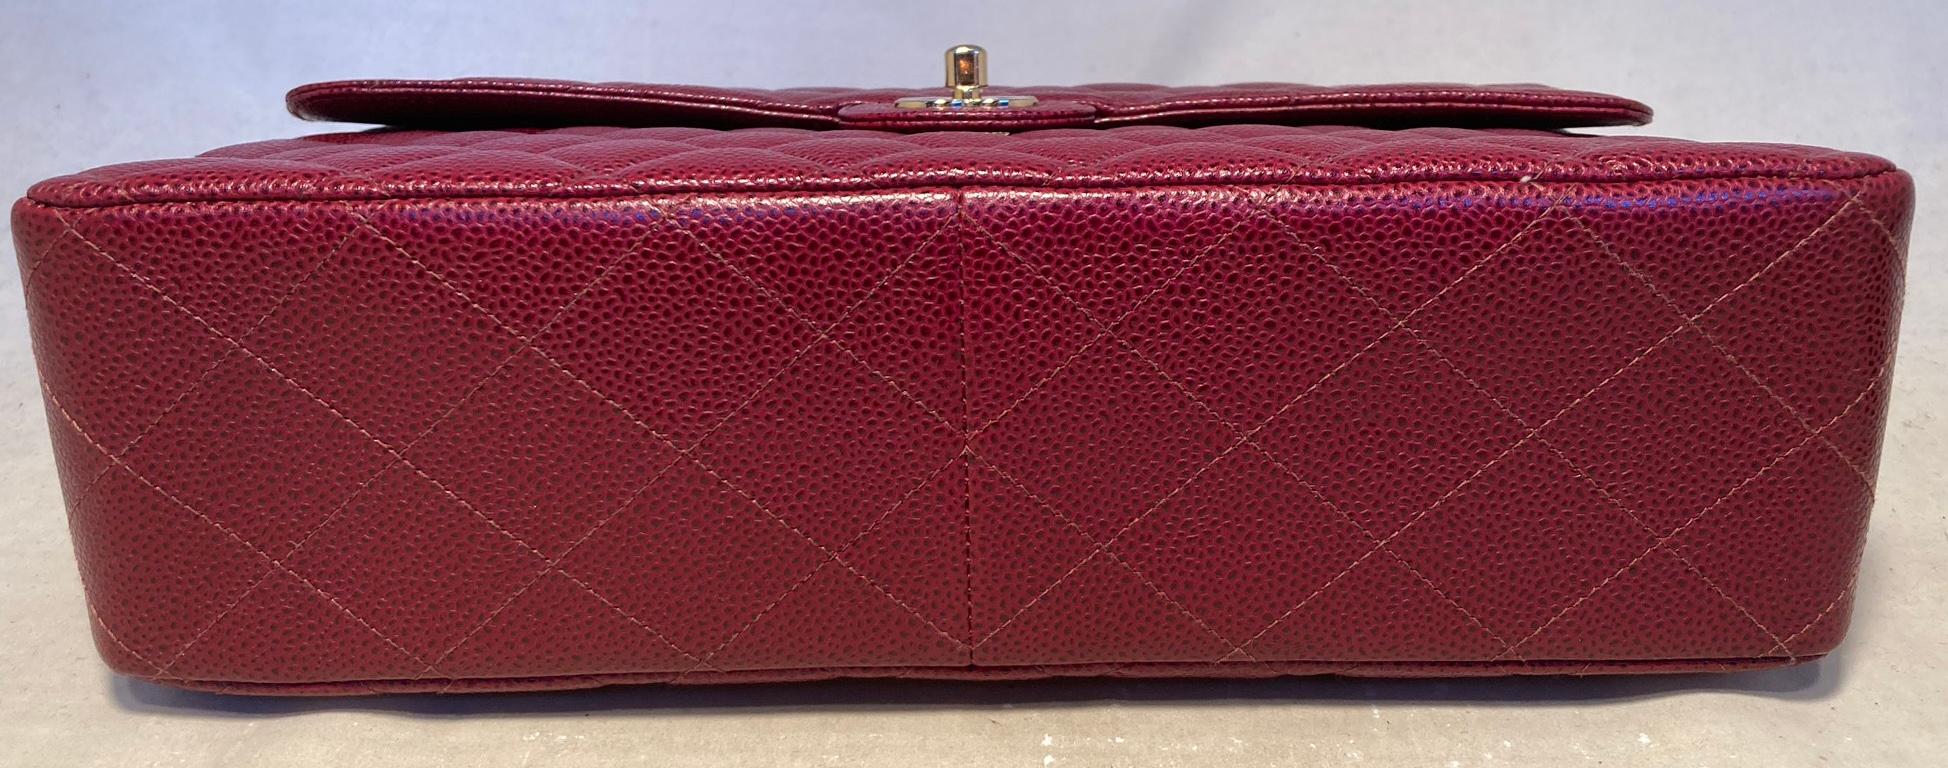 Brown Chanel Maroon Quilted Caviar Leather Maxi Classic Flap Shoulder Bag